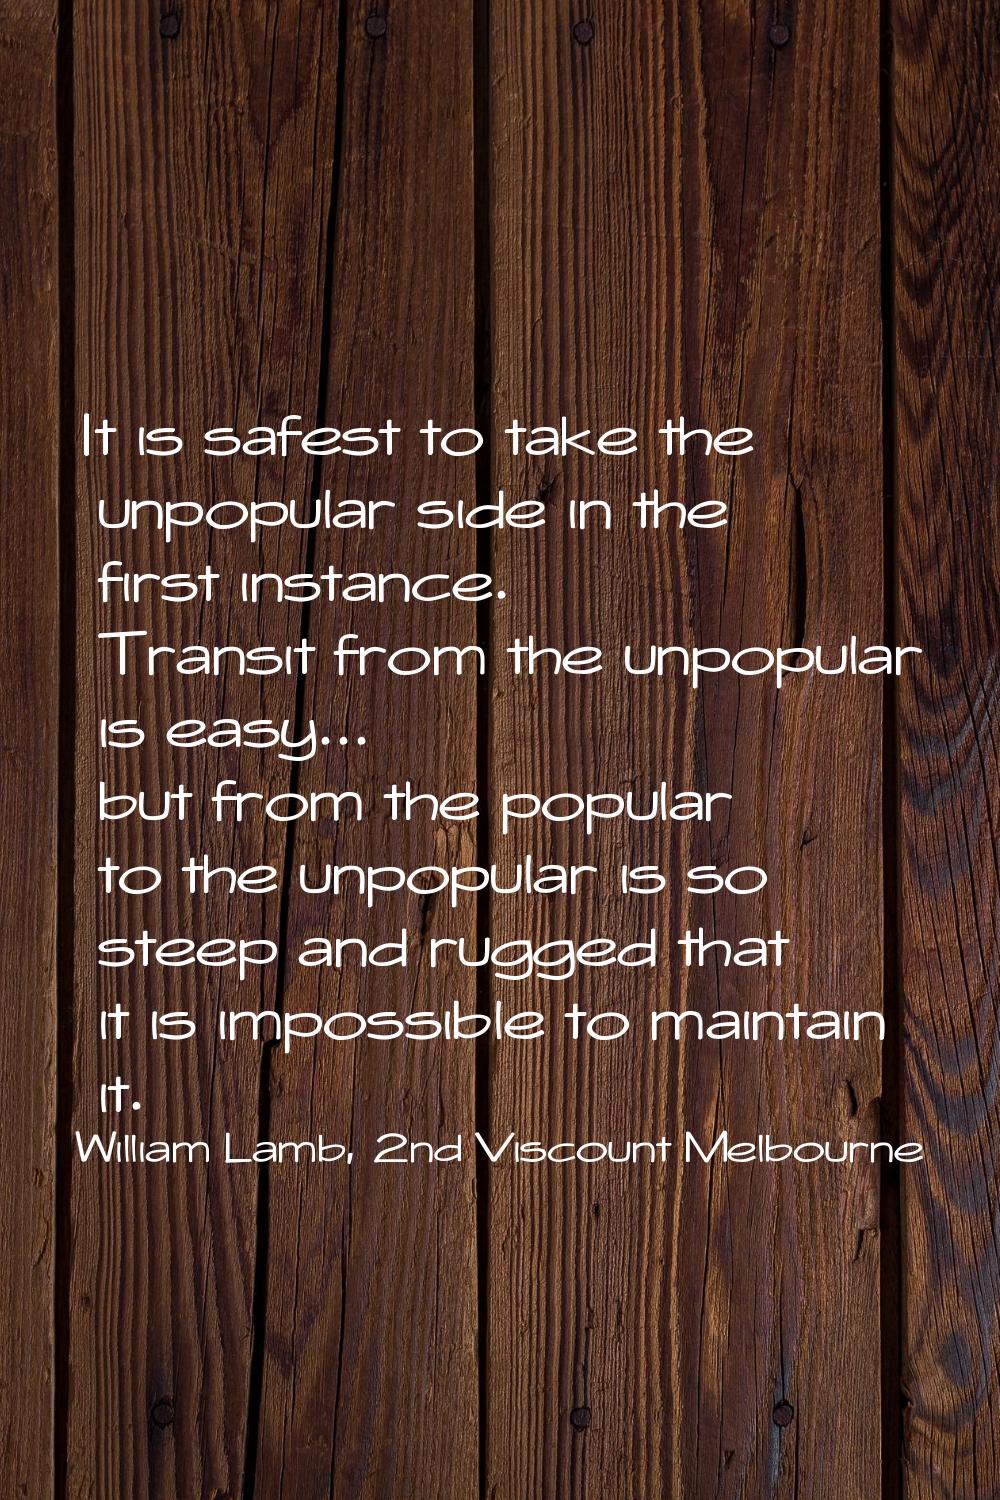 It is safest to take the unpopular side in the first instance. Transit from the unpopular is easy..